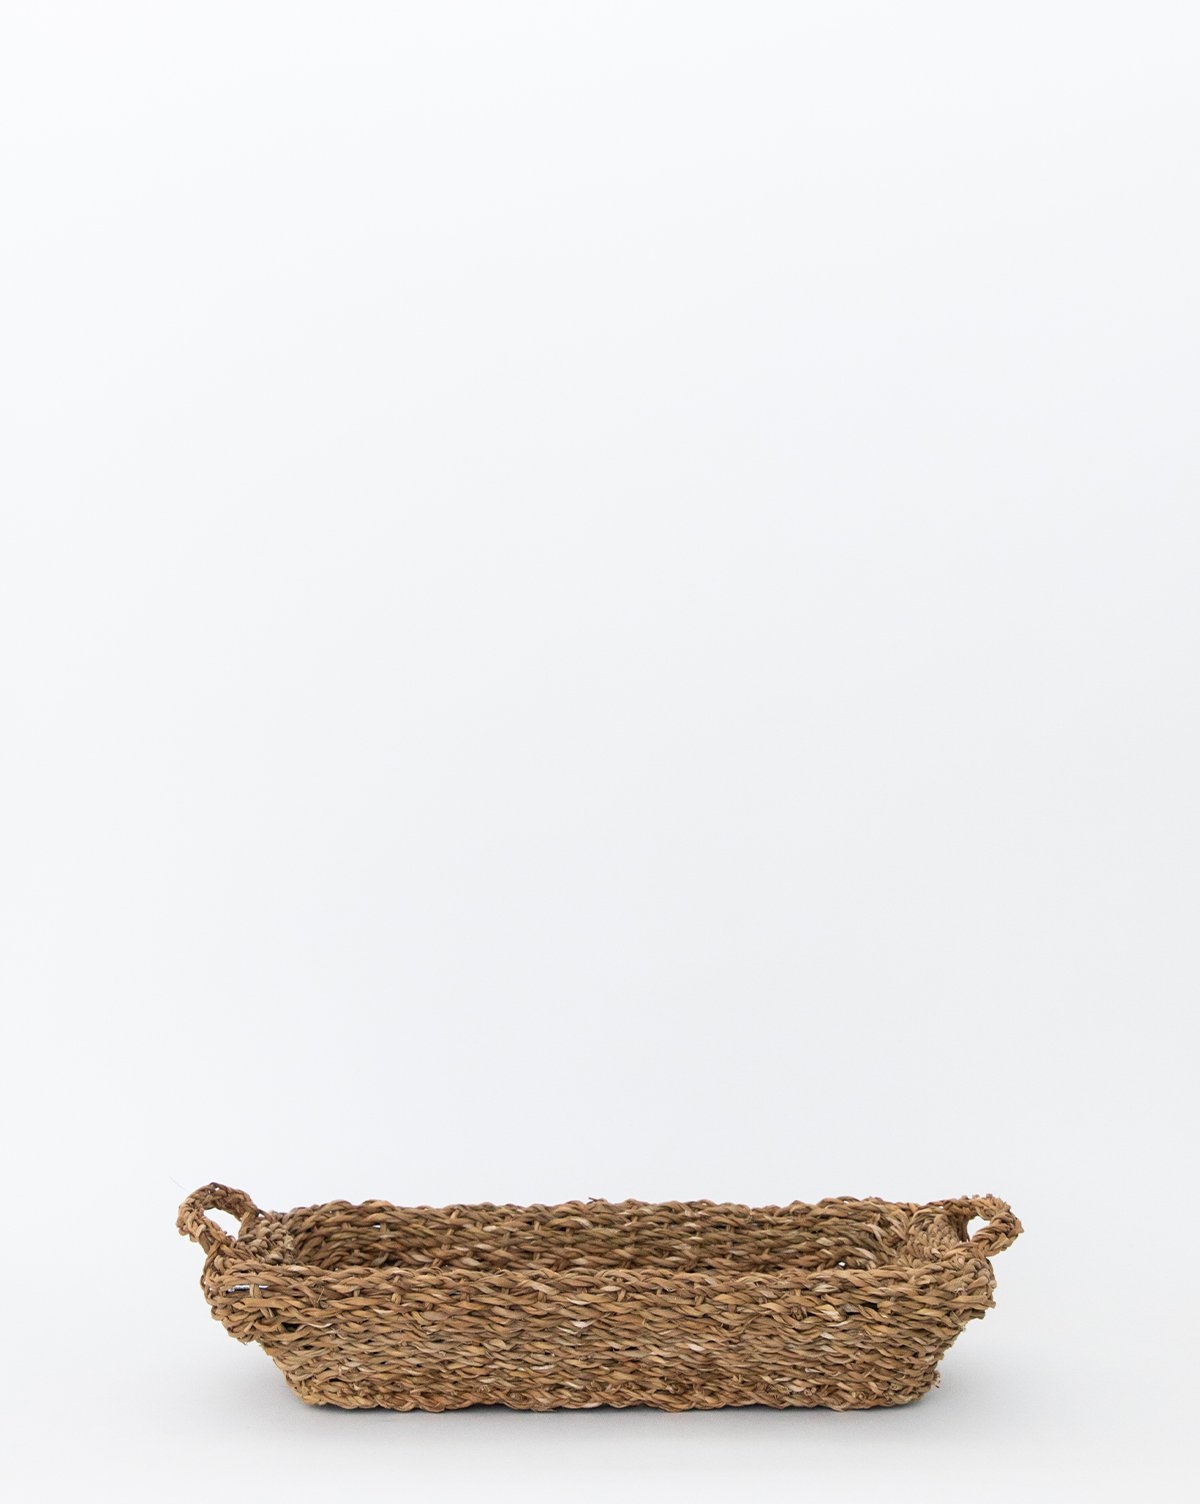 SEAGRASS CATCH-ALL BASKET - Image 0